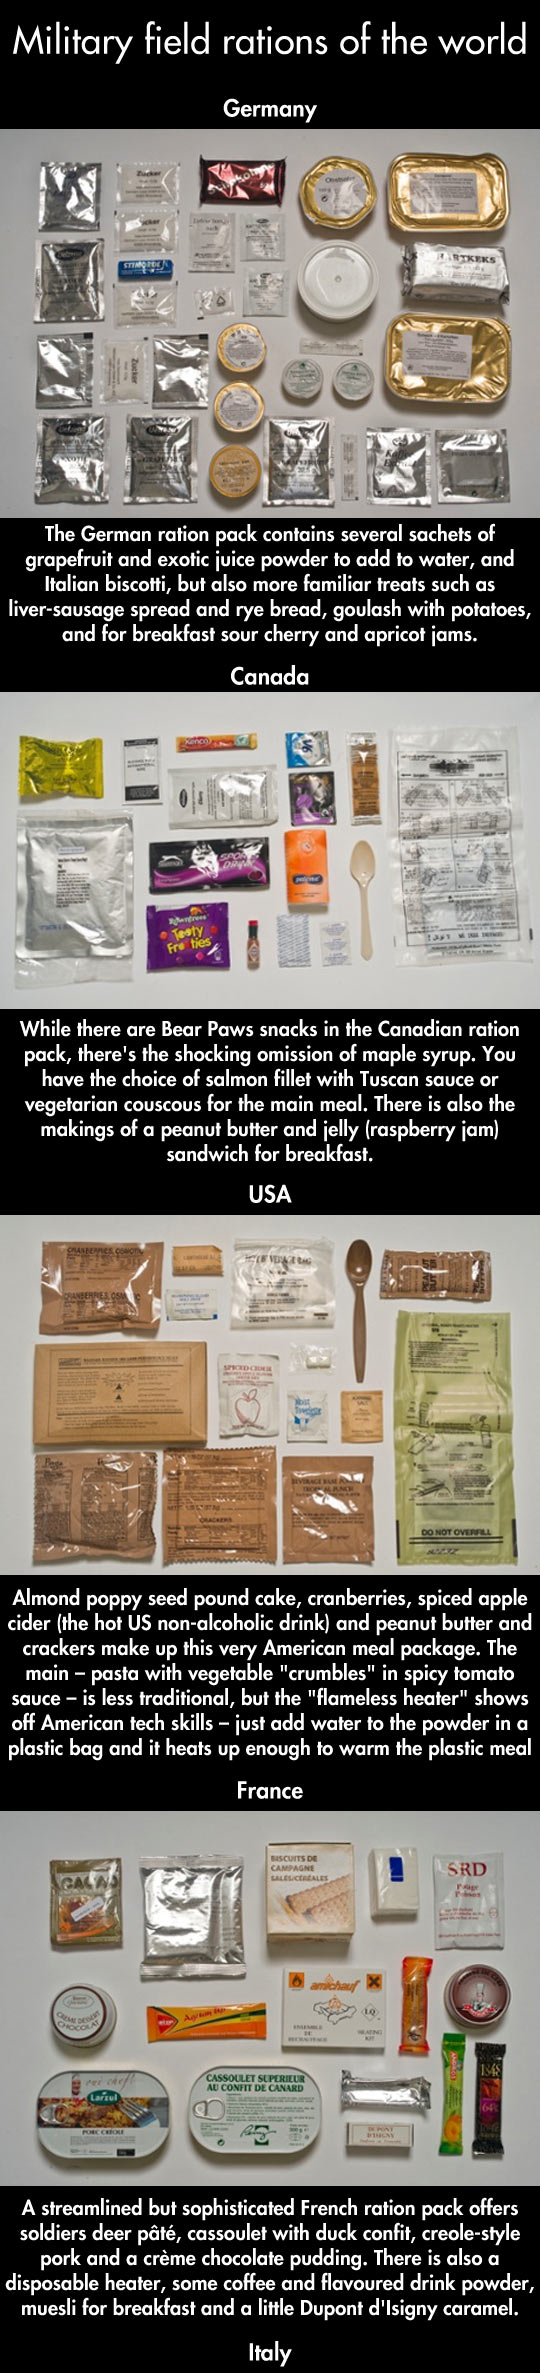 Military field rations around the world.